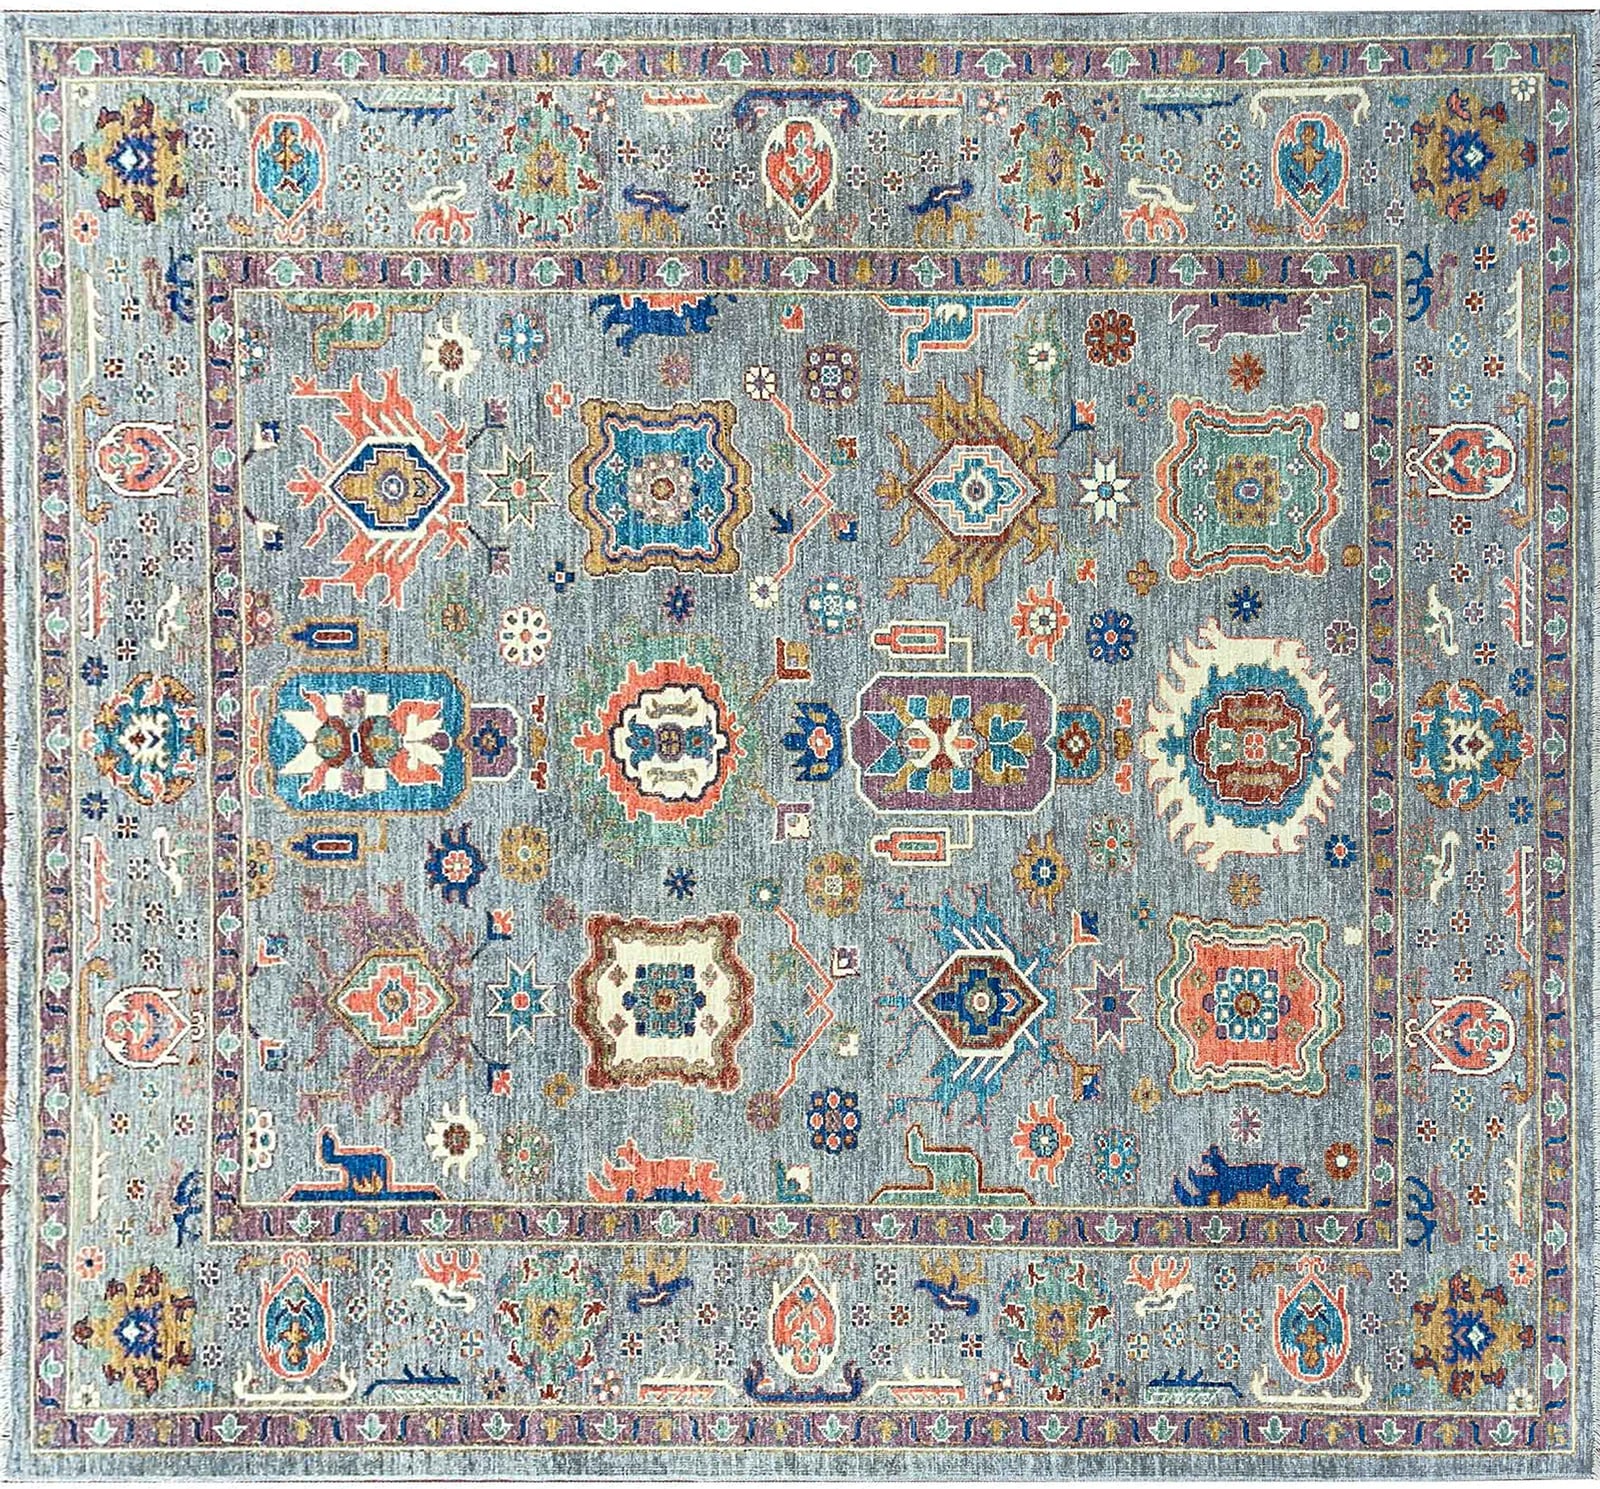 Fine Rugs Private Collections